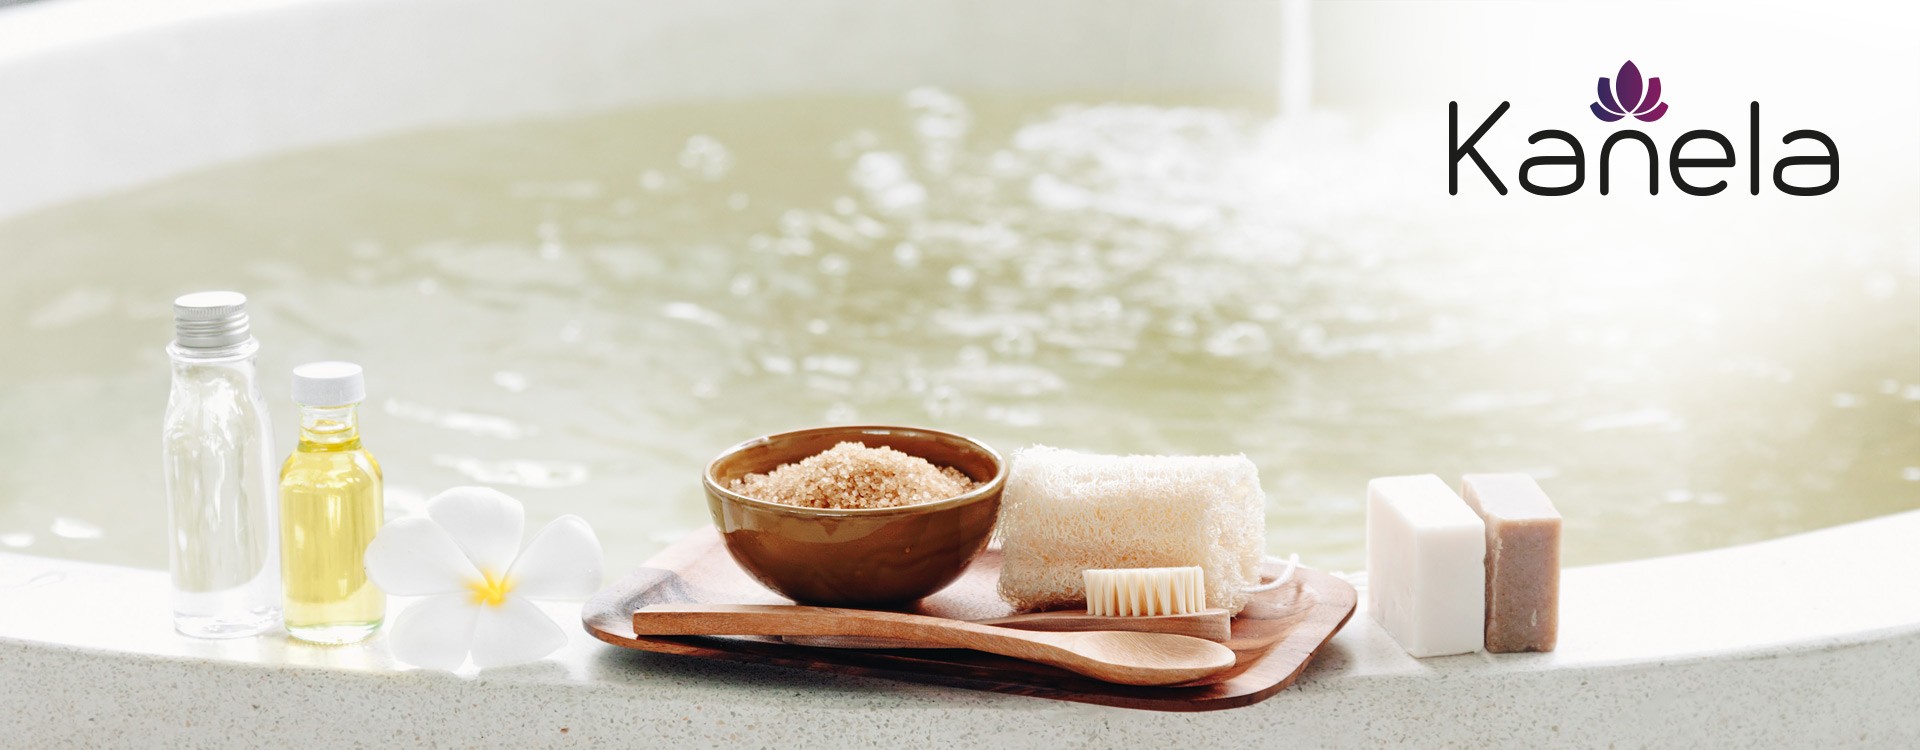 THE COLD BATH – BENEFICIAL RELAXATION WHEN ILL